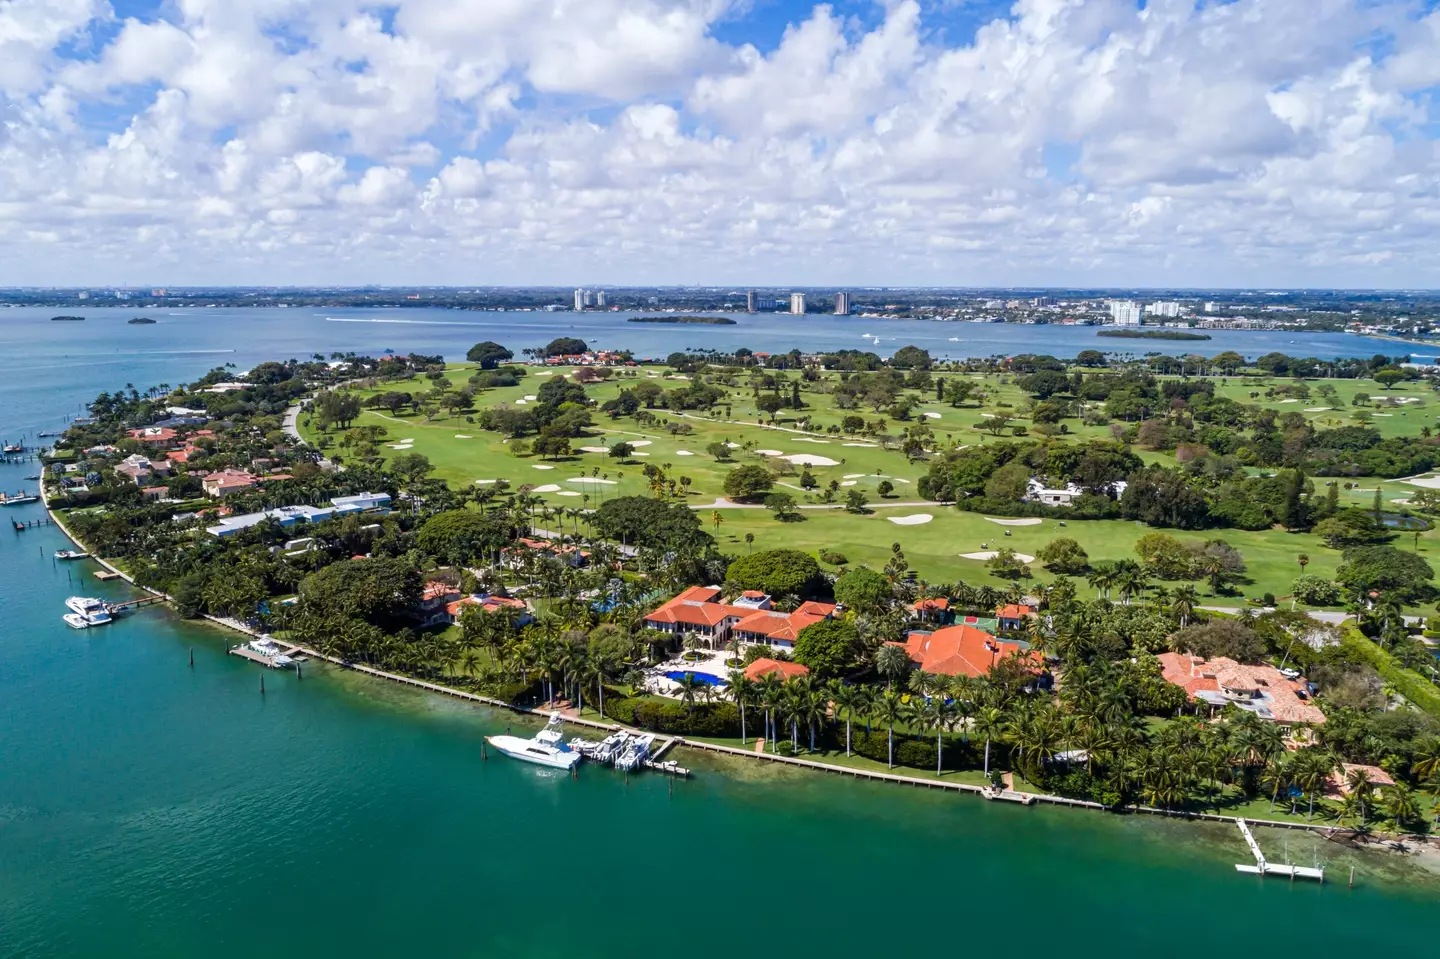 Florida, Miami, Indian Creek Island, country club, golf course on Billionairs Bunker, aerial view.